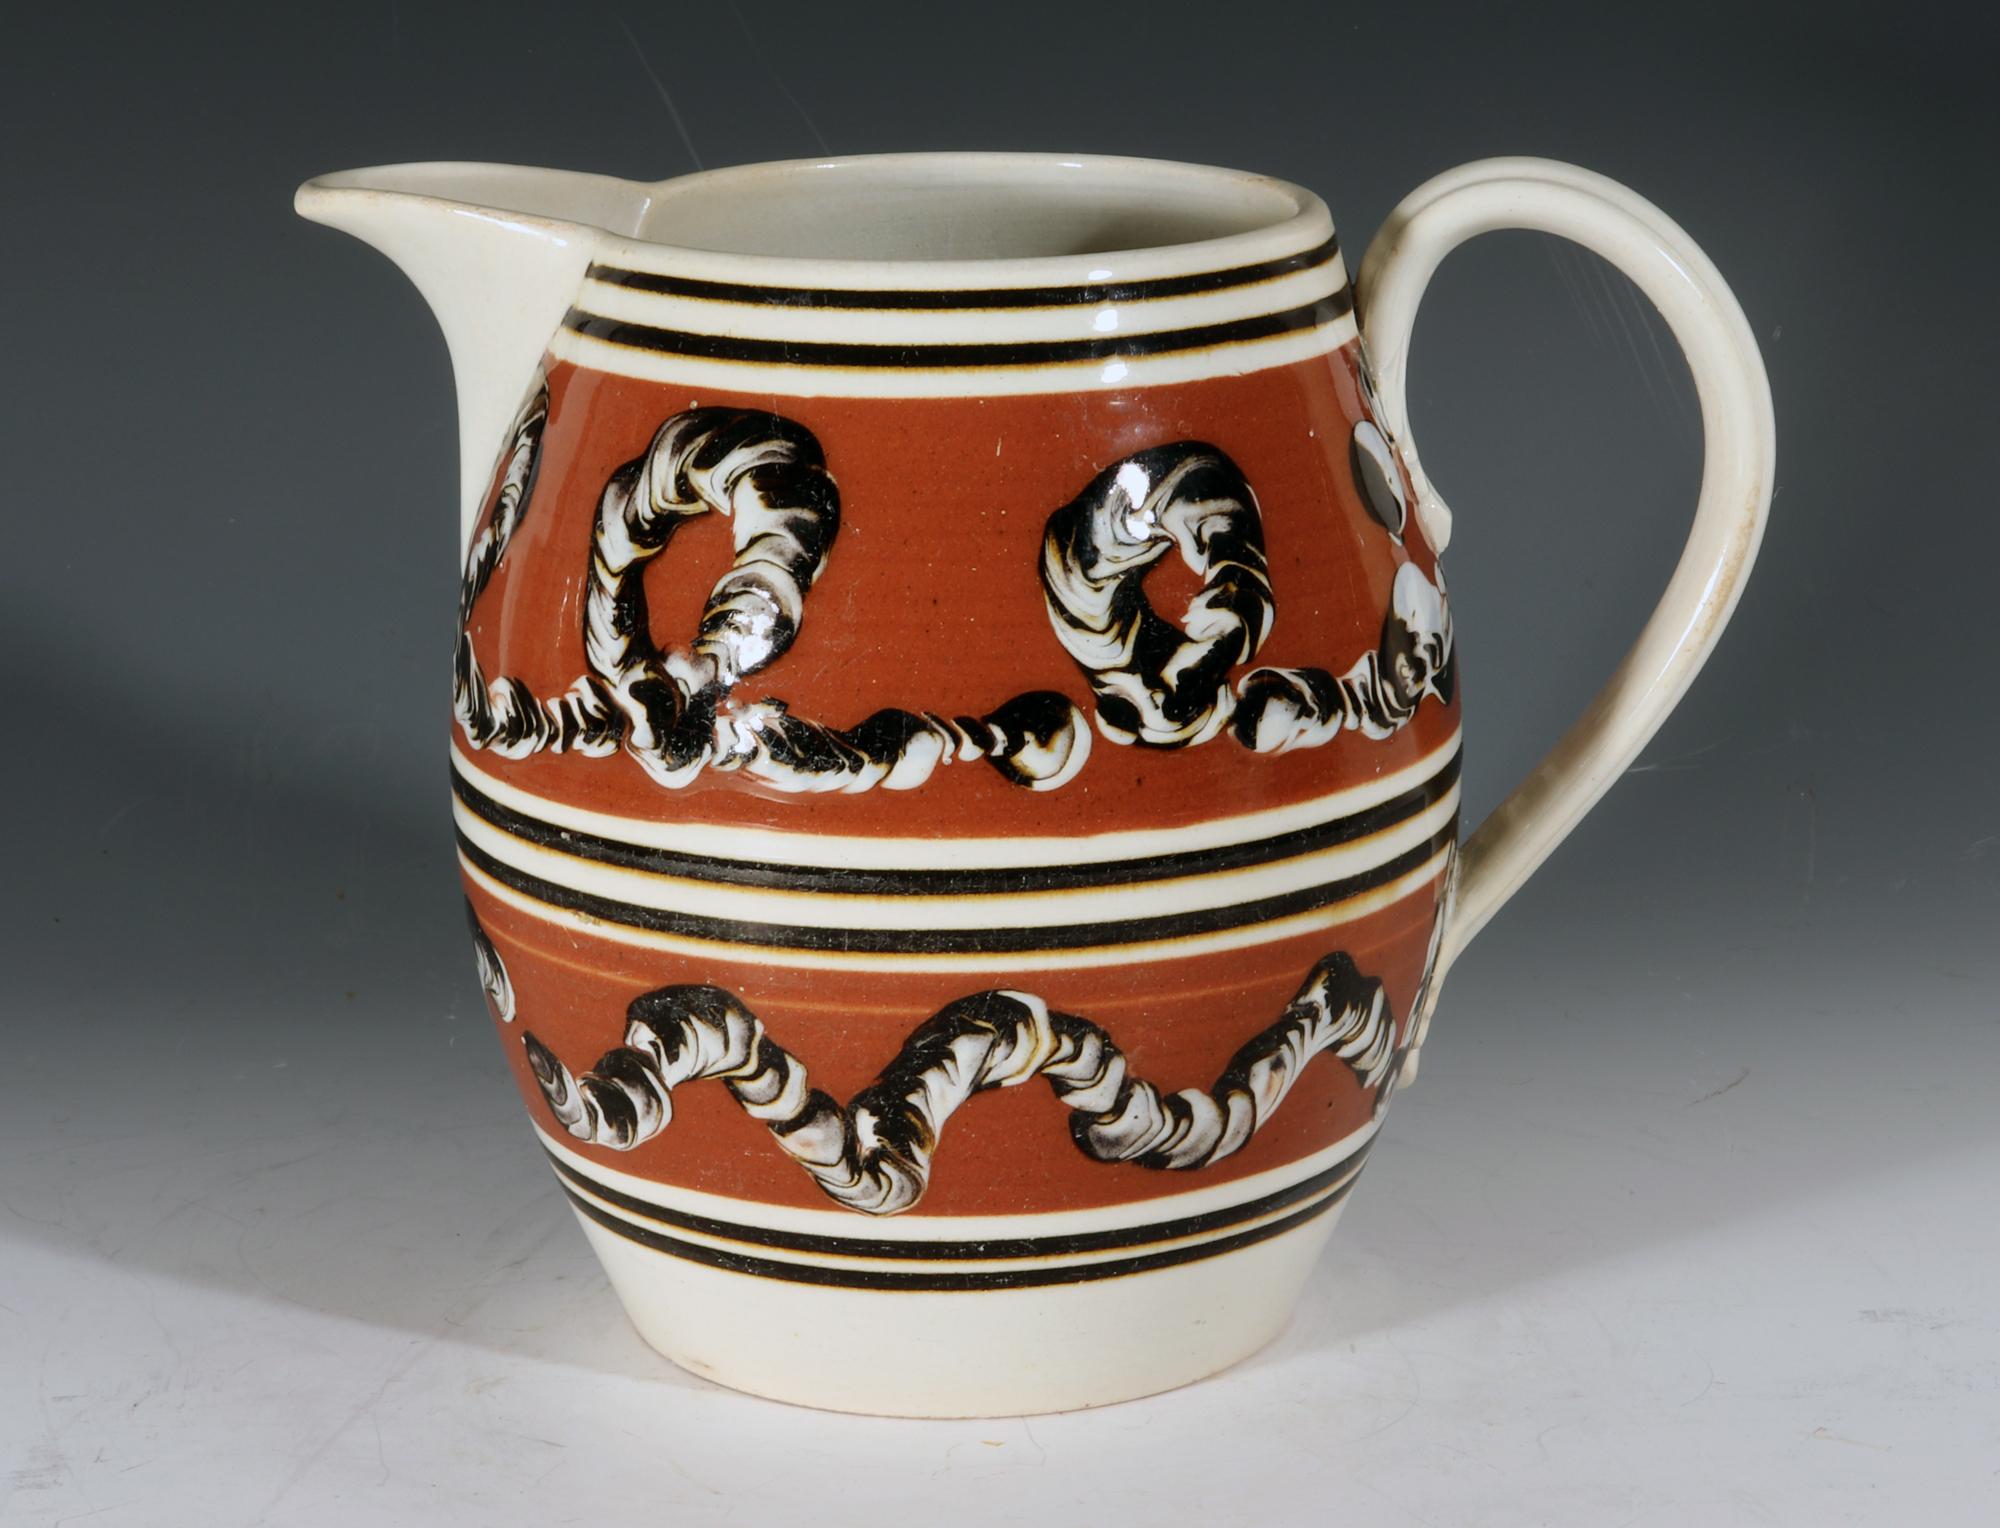 Mocha Pottery Earthworm Jug,
circa 1820

The mocha pottery jug has two wide ocher bands each with an earthworm design. The top with a looping design and the lower one with a wavy design. To the top, bottom and center are thin brown lines- three